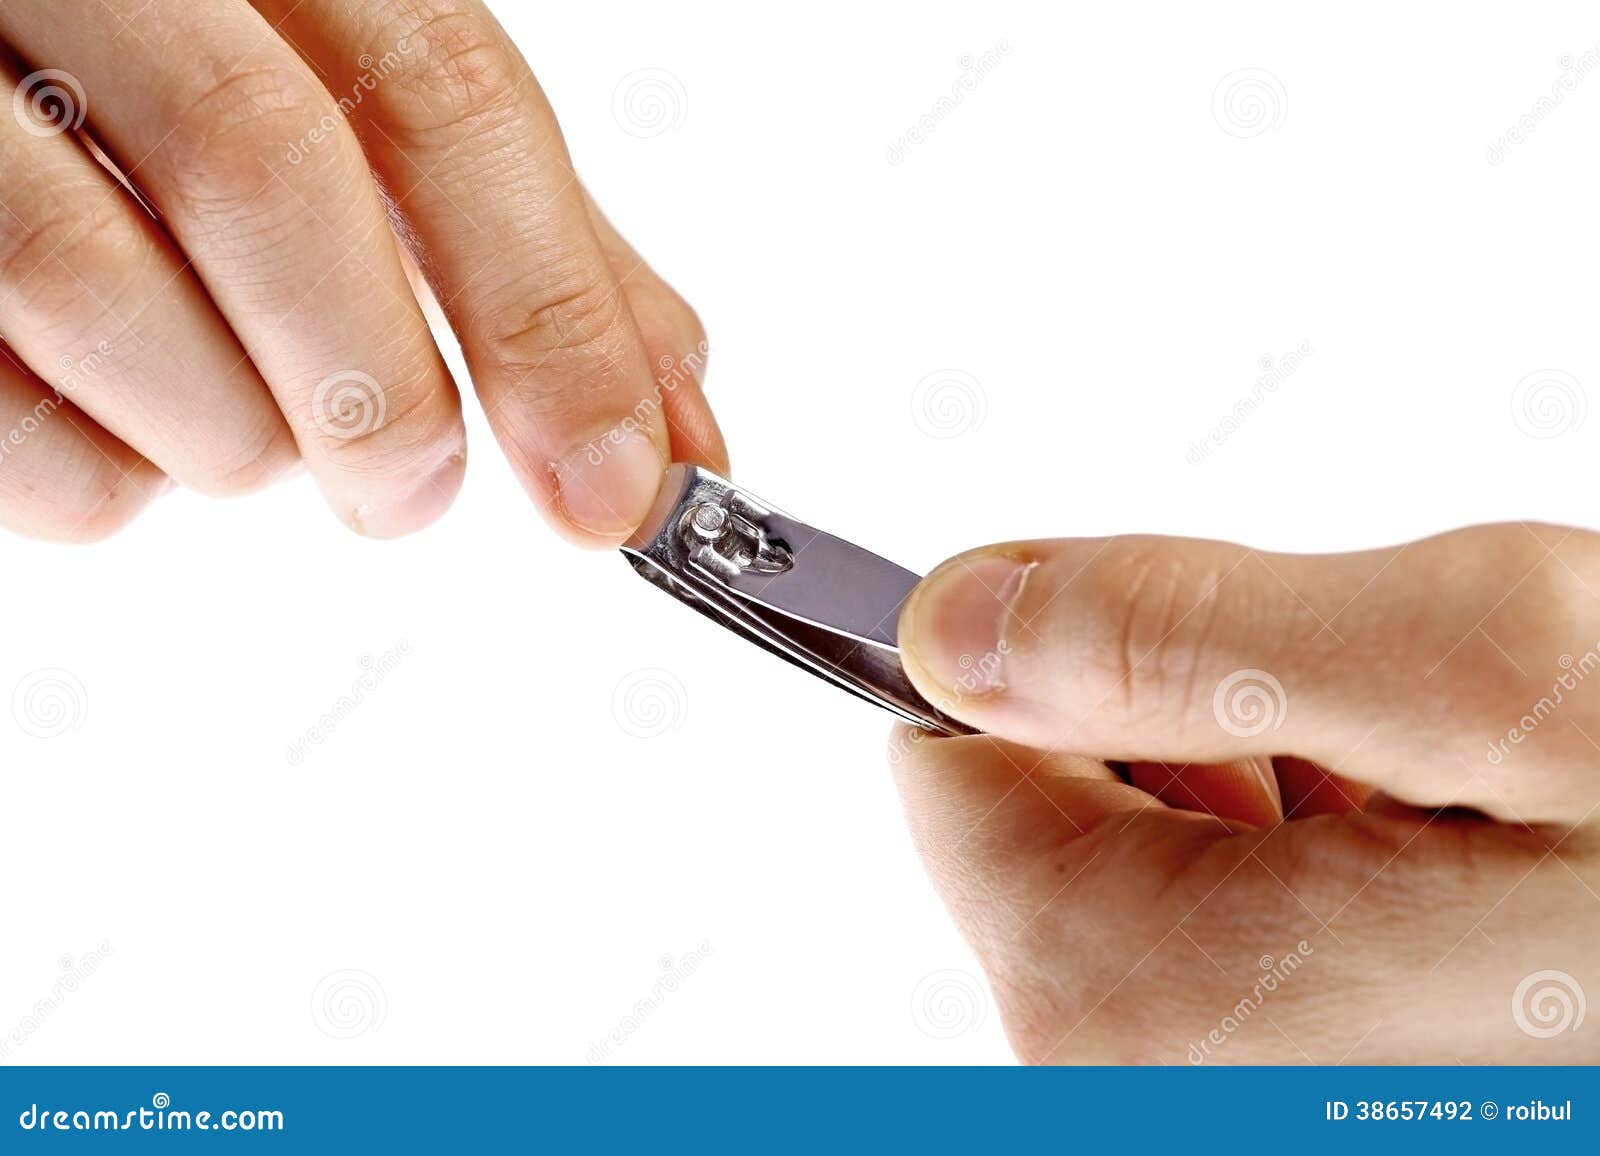 Premium Photo | Hands close-up, a girl doing a manicure to herself, nail  clippers.